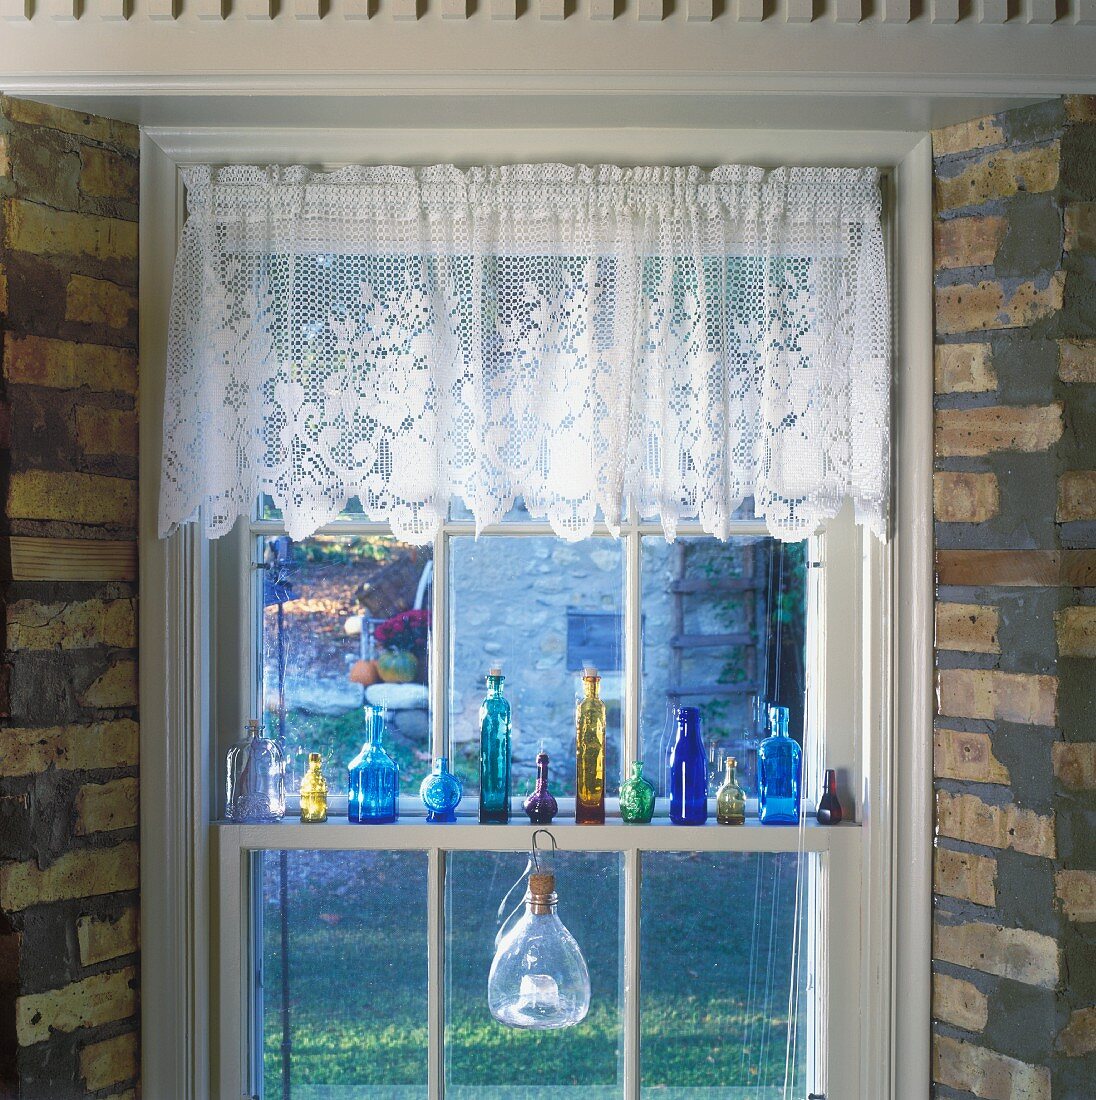 Decorated lattice window with lace curtain and collection of small glass bottles